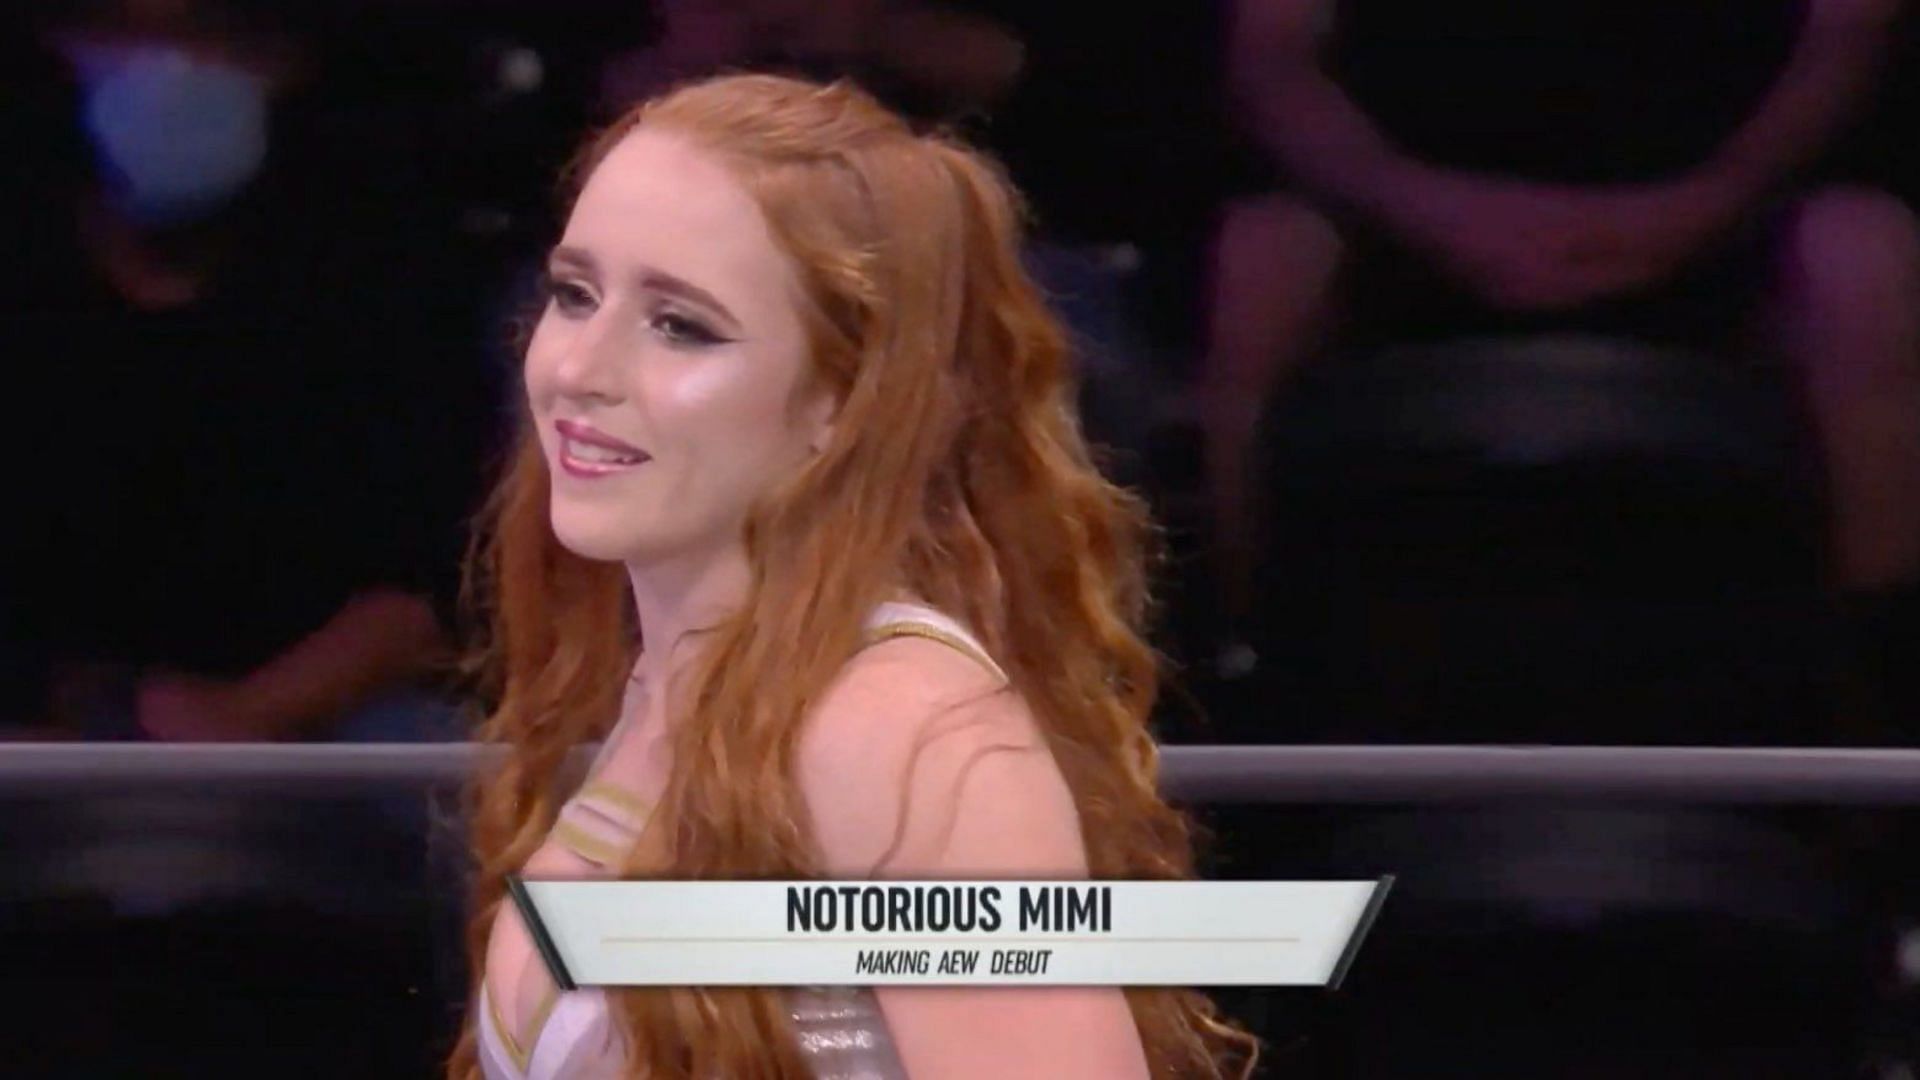 Amelia Herr competed in a few AEW matches